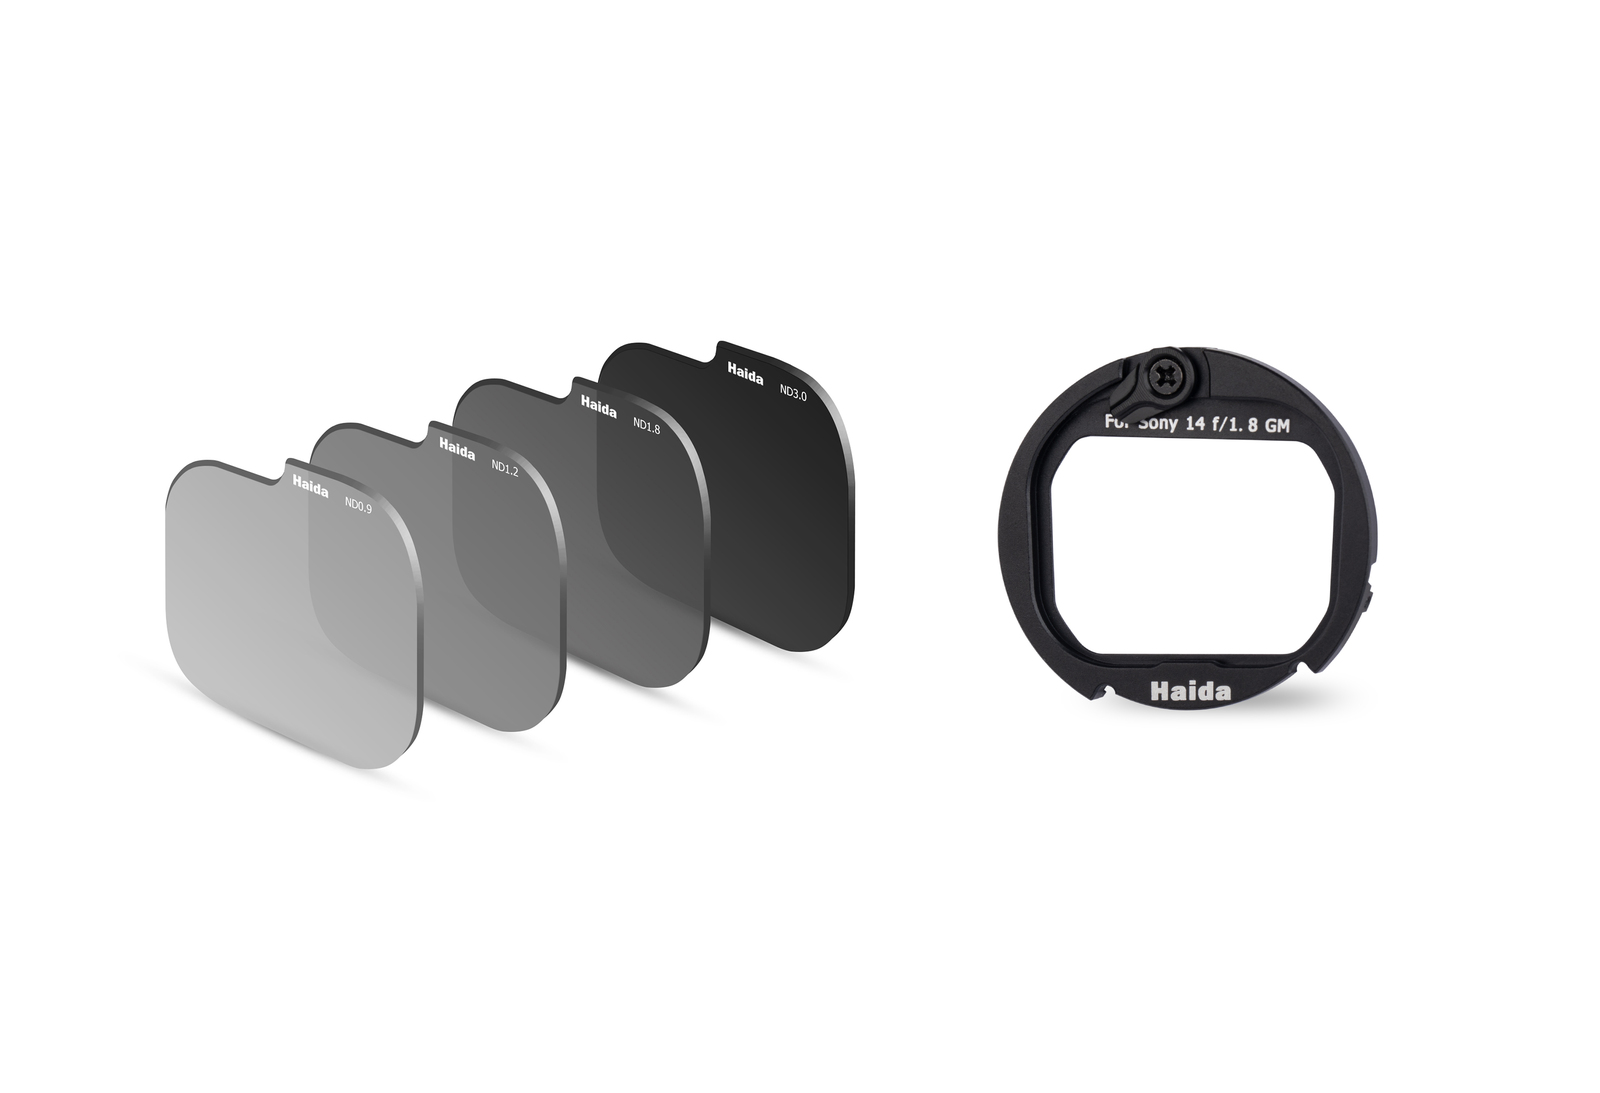 Haida Rear Lens ND Filter Kit (ND0.9+1.2+1.8+3.0) for Sony FE 14mm F1.8 GM Lens with Adapter Ring - 3, 4, 6 & 10 Stop main image